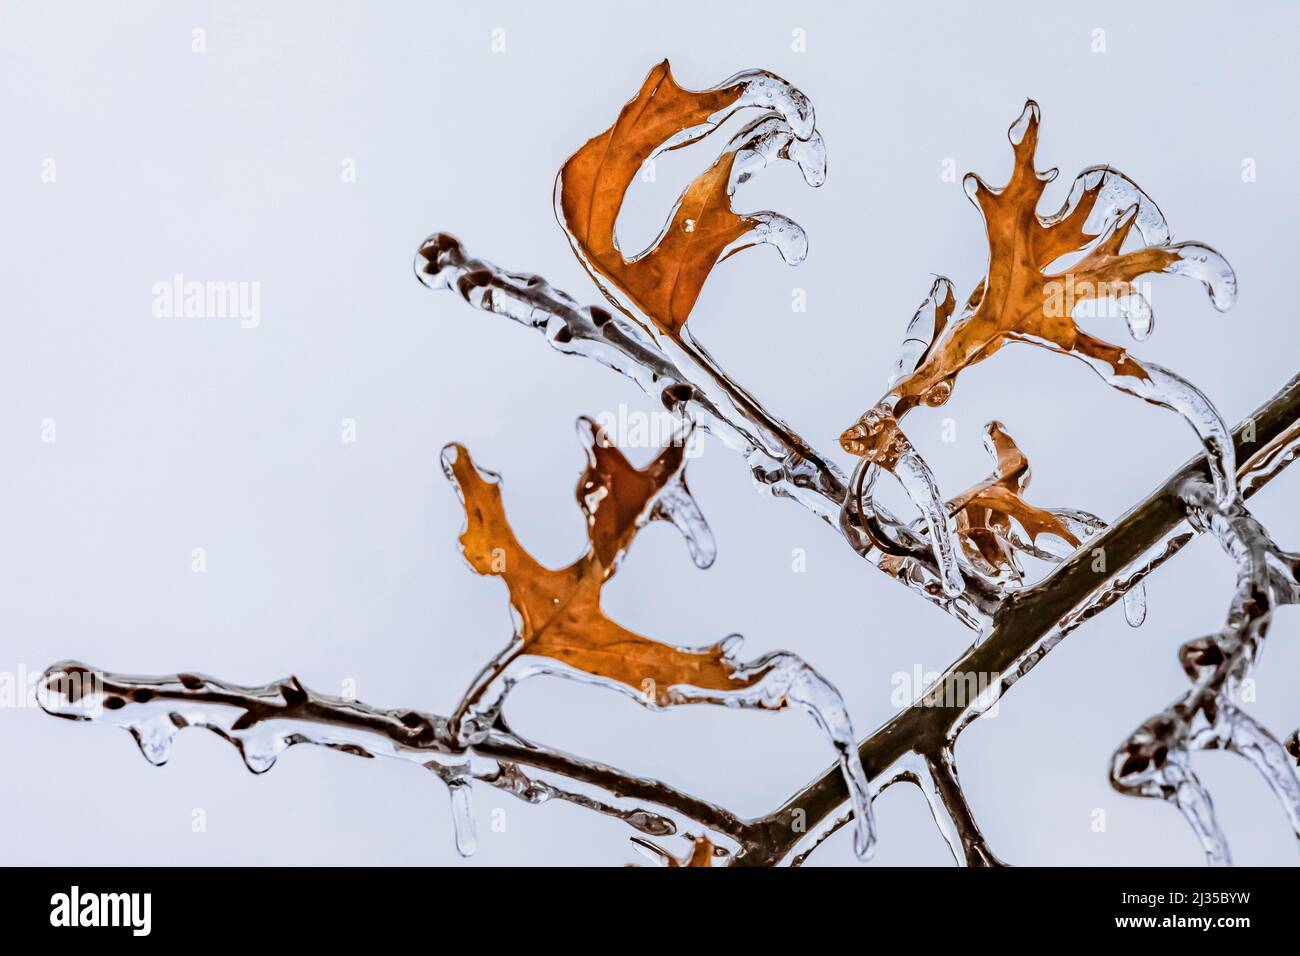 Black Oak, Quercus velutina, leaves dripping icicles after a freezing rain in Michigan, USA Stock Photo